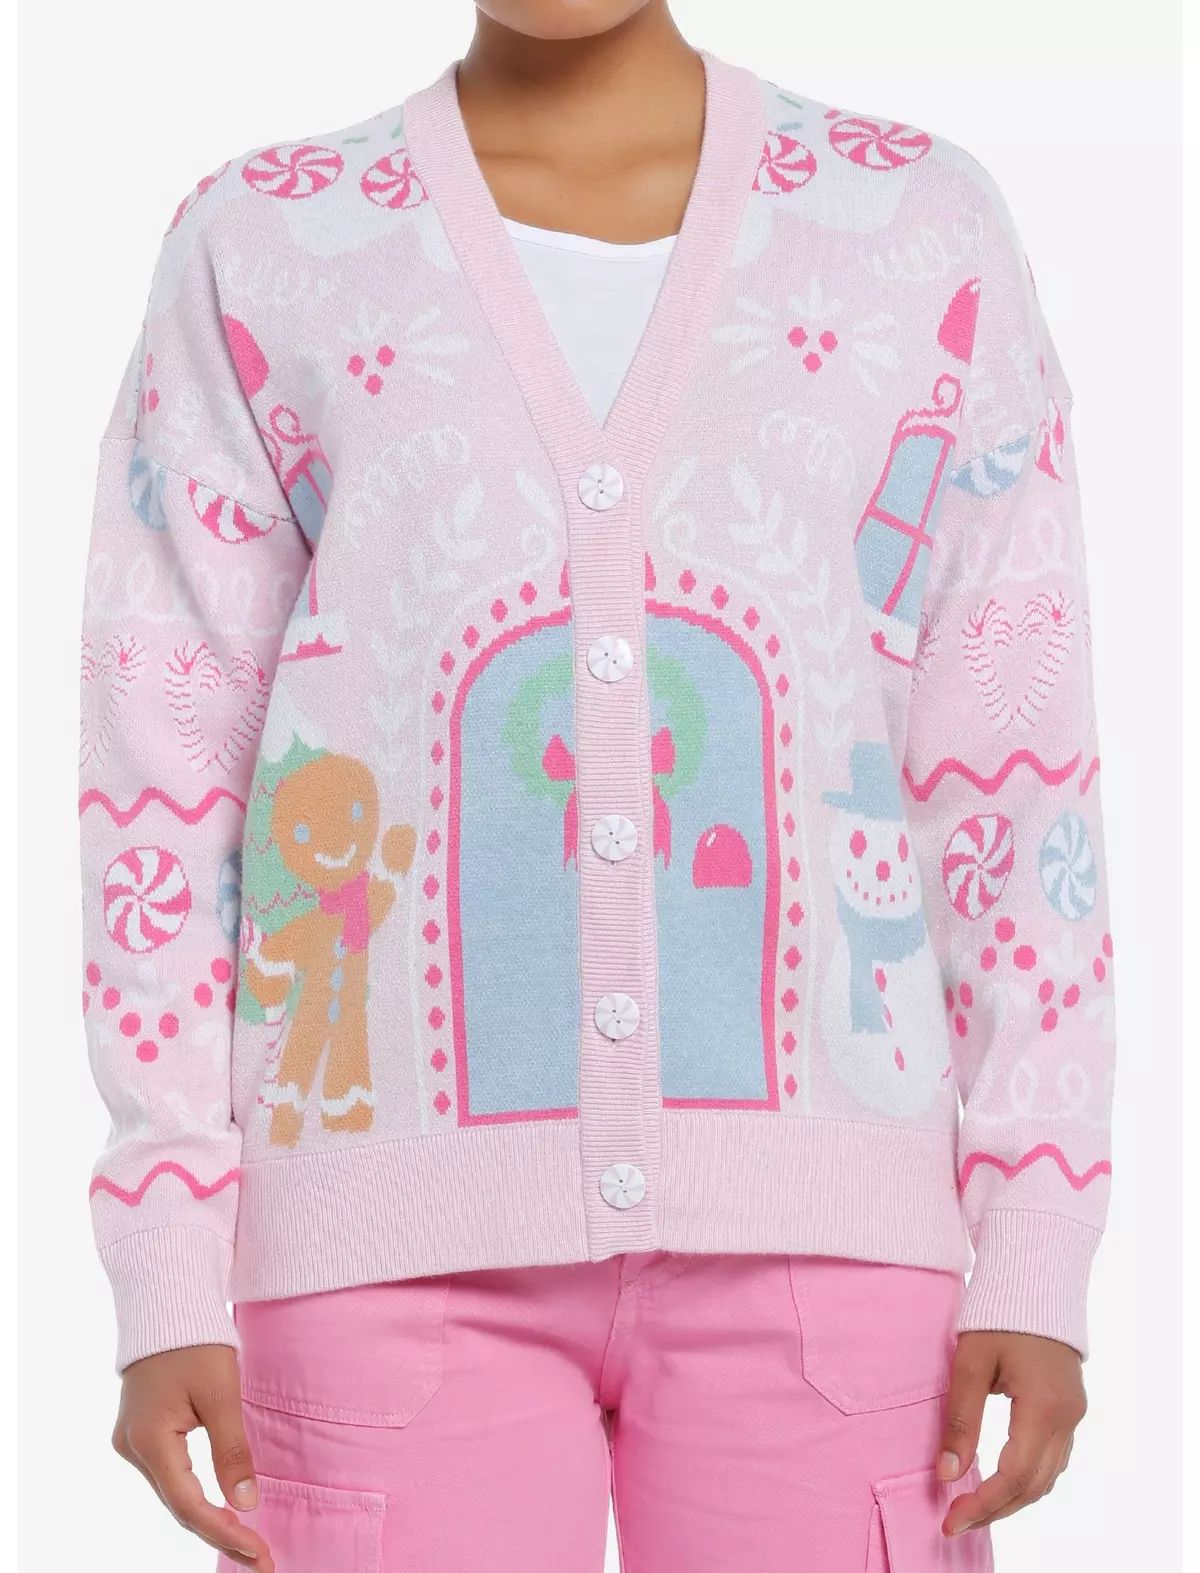 Sweet Society Pink Gingerbread House Girls Cardigan | Hot Topic | Hot Topic